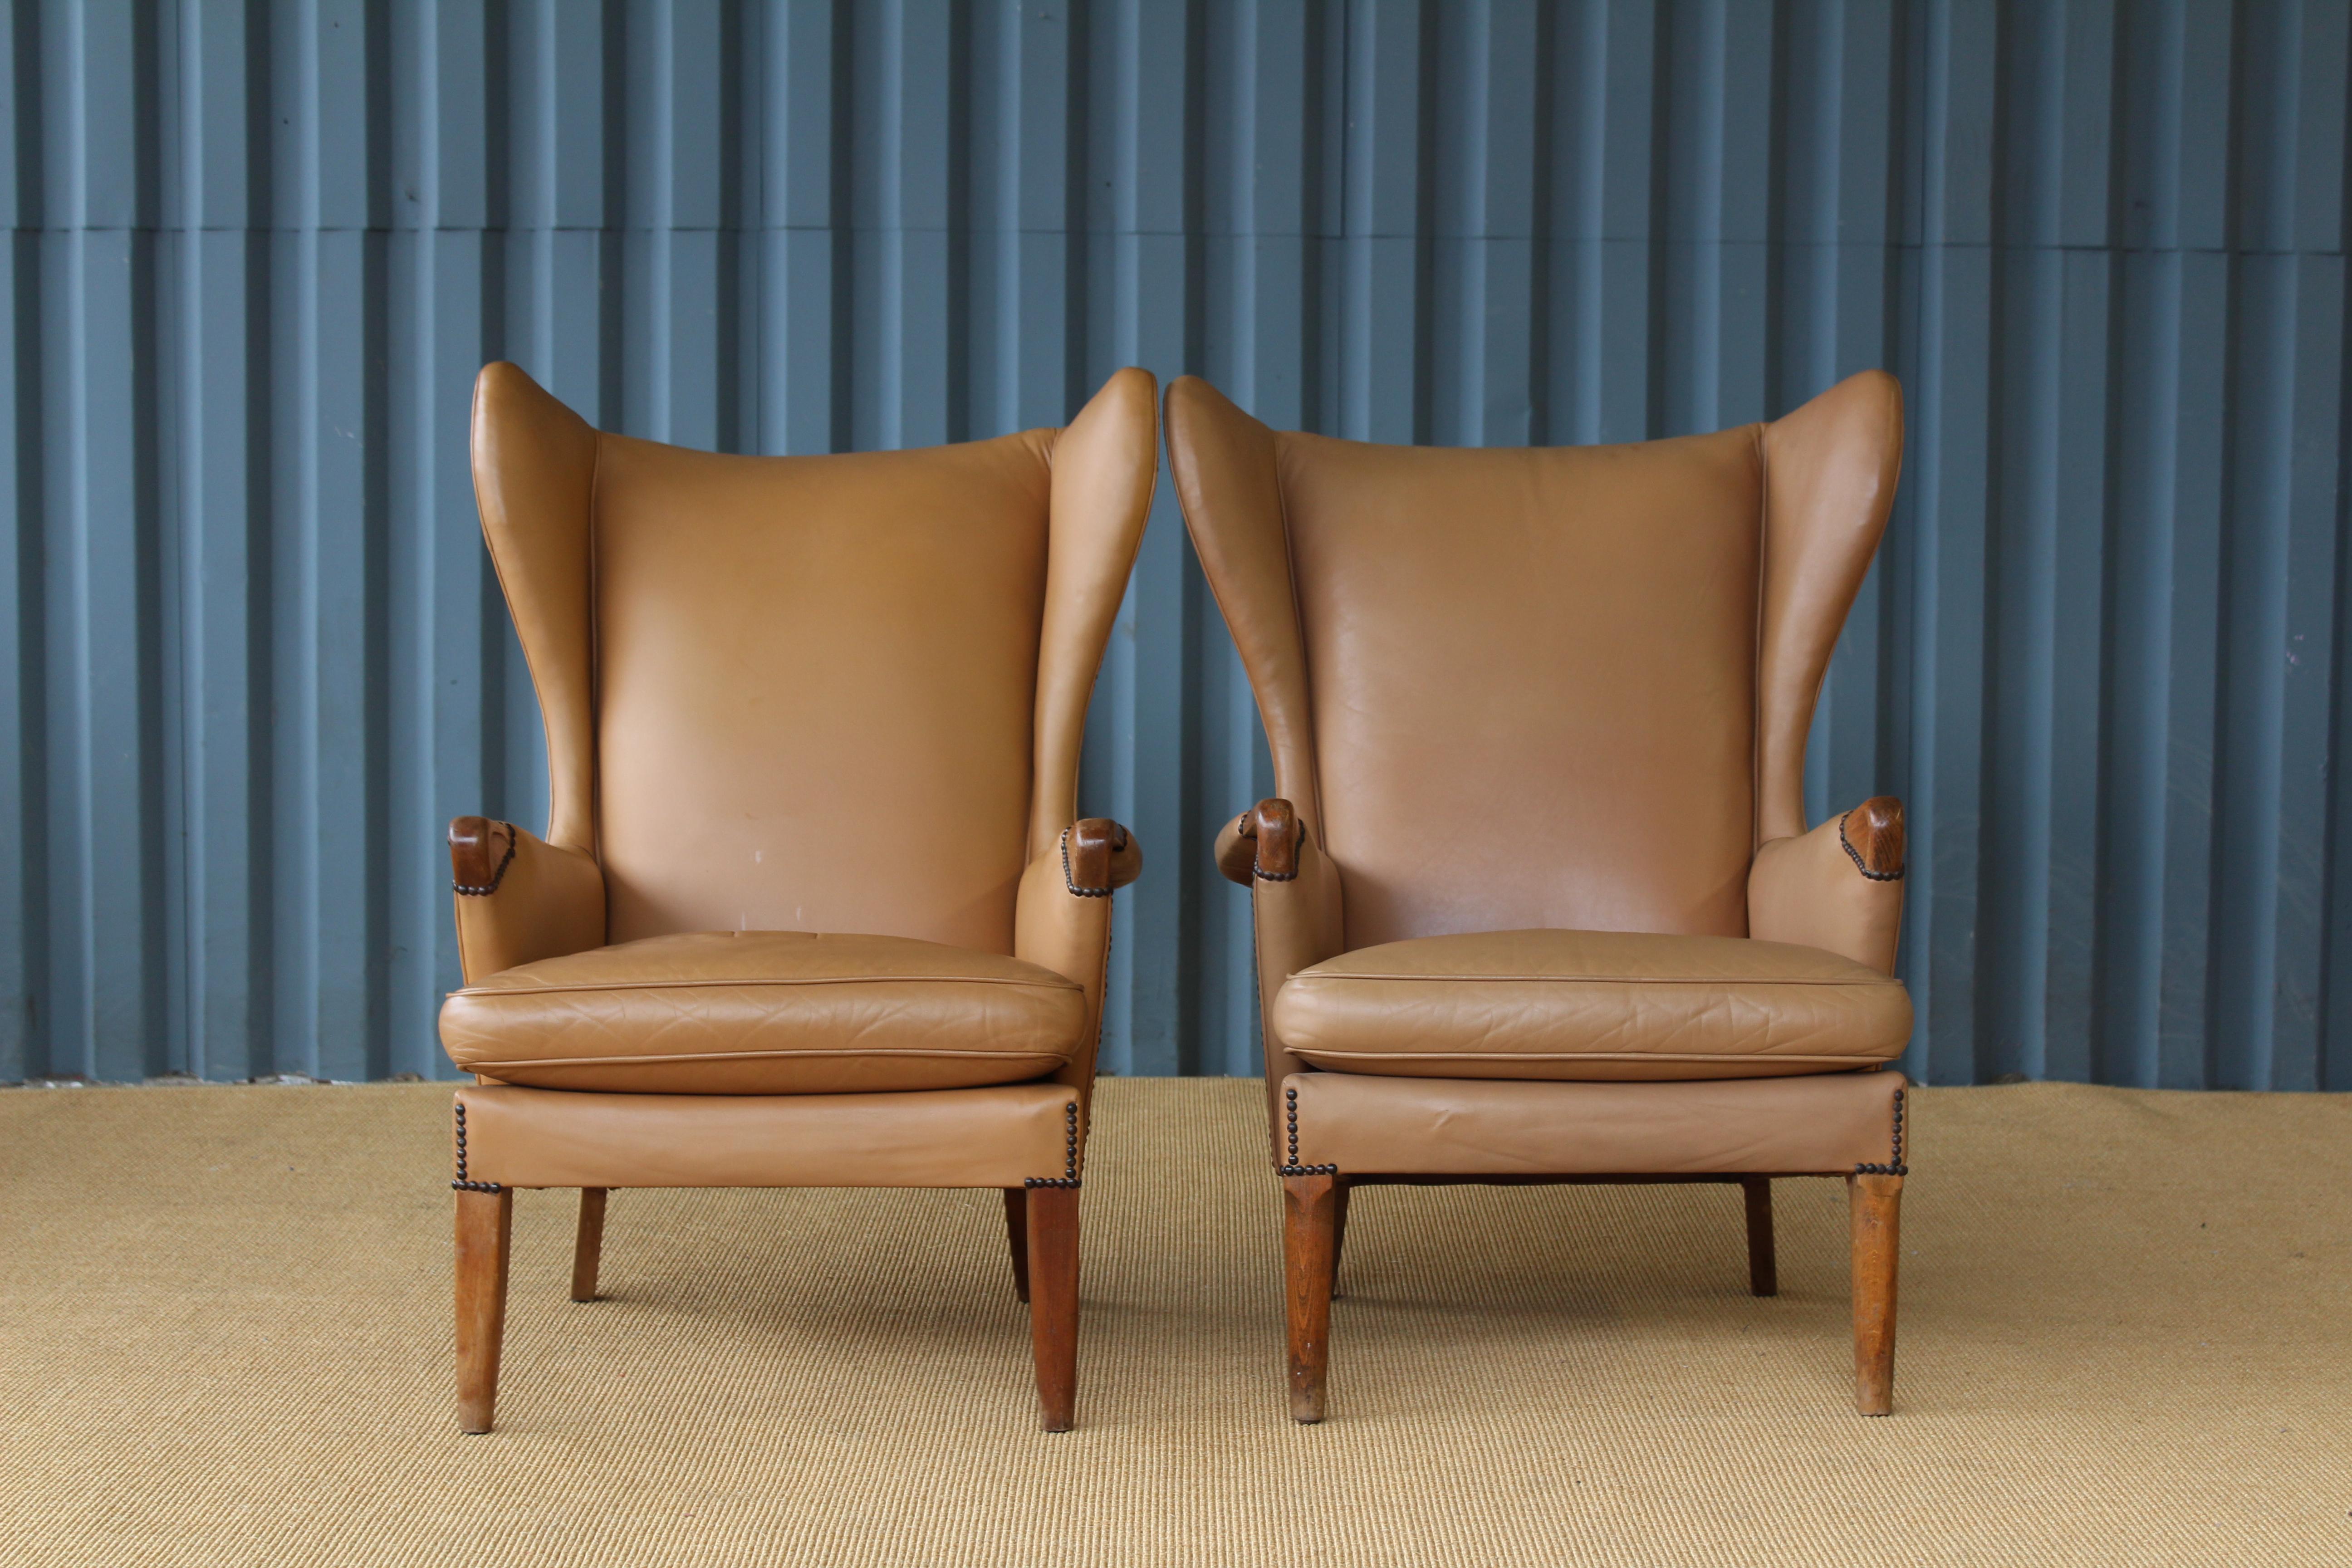 Pair of armchairs by Parker Knoll, 1950s, United Kingdom. They feature the original tan leather upholstery with brass nailhead details along the backside and near the legs. Leather is in very nice condition considering age with minimal signs of